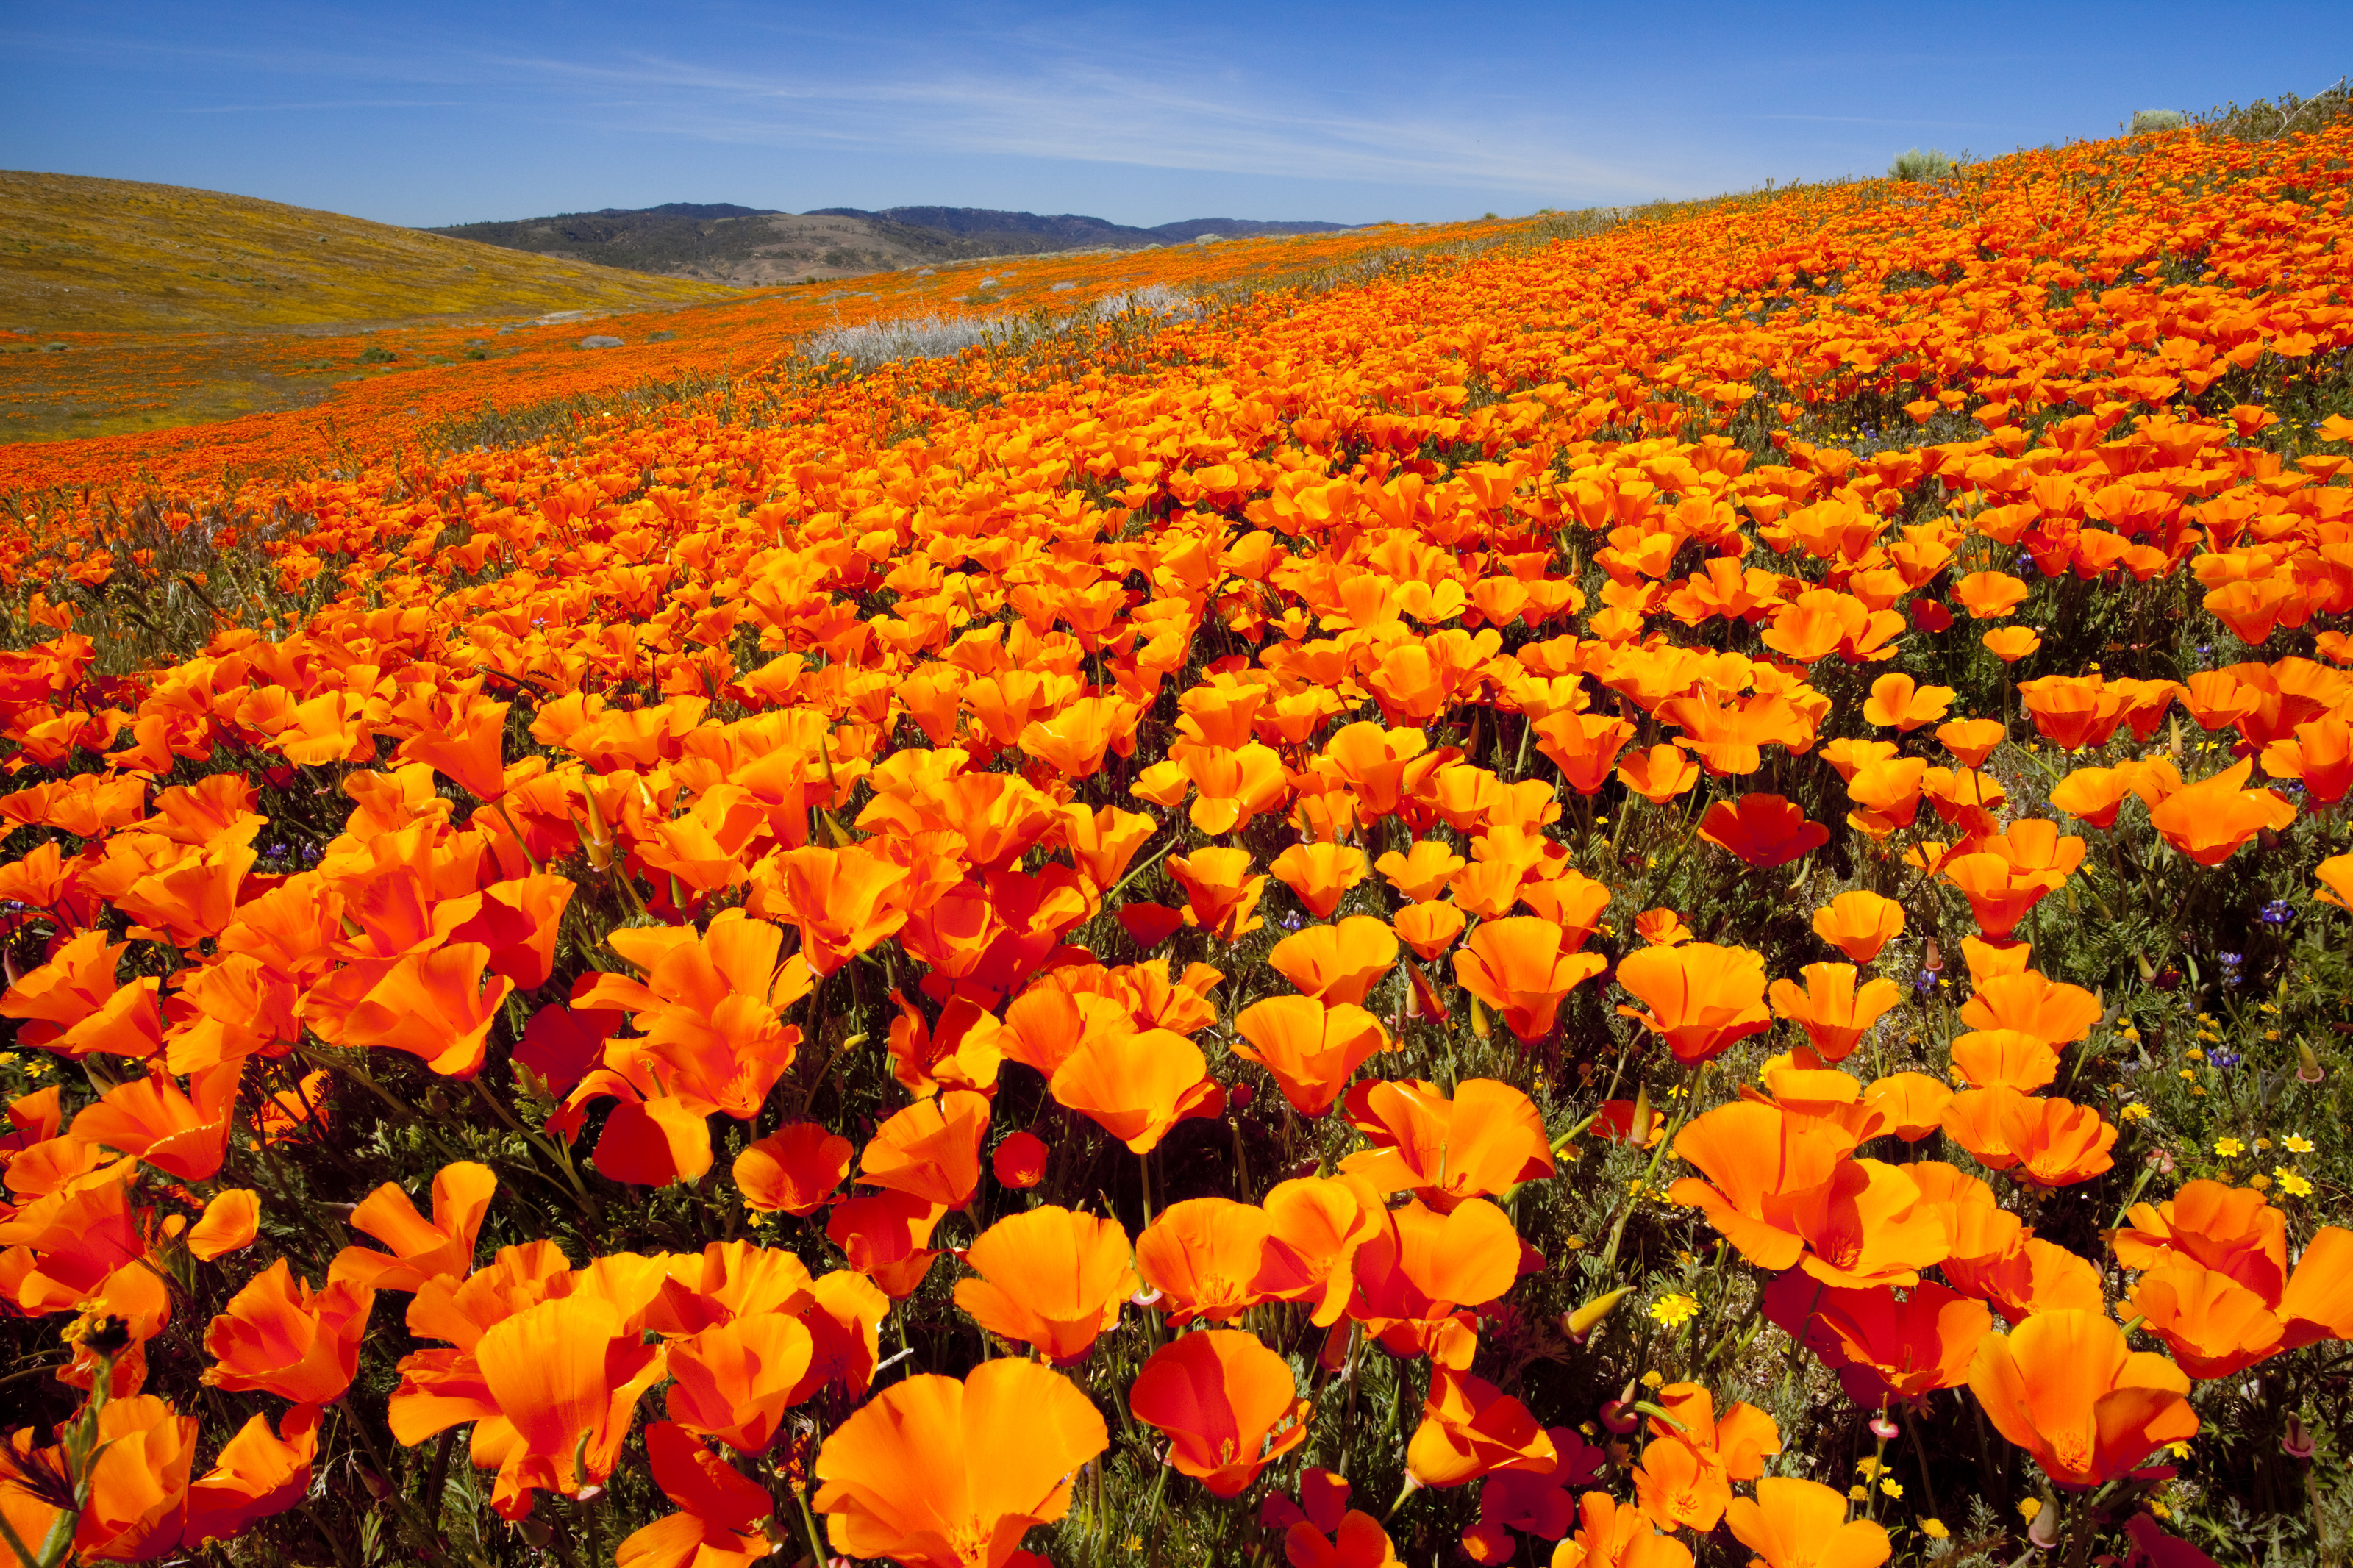 California Poppy Field Mural By Stephen Matera Your Way